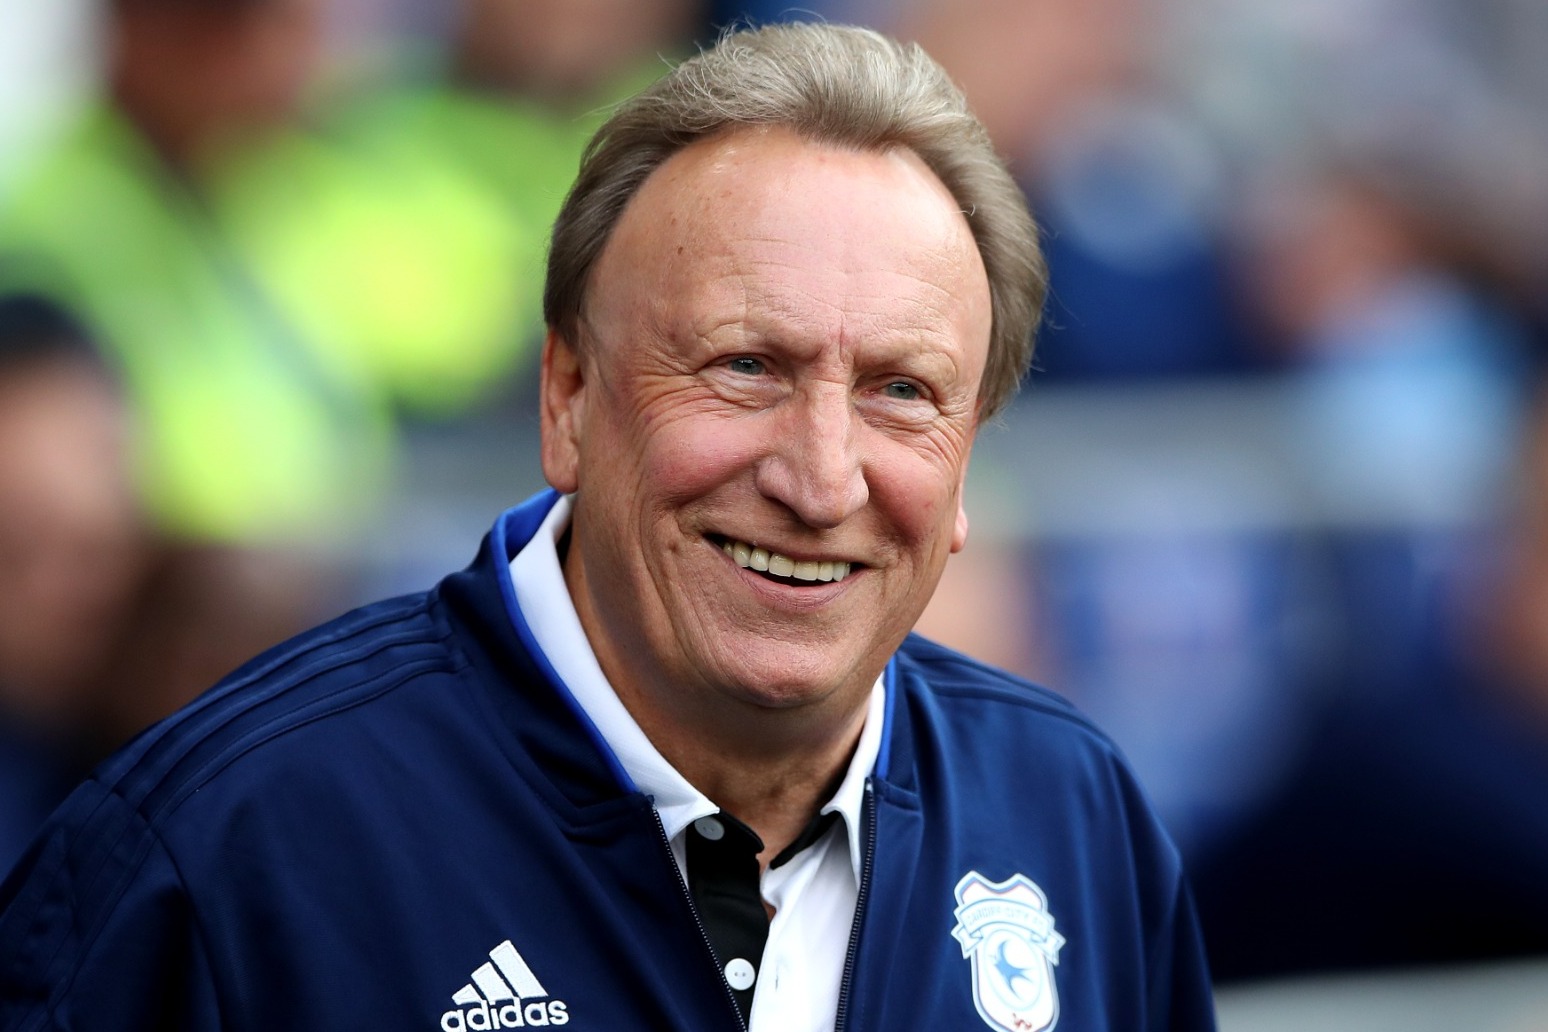 ‘I’ve had a good run’ – Neil Warnock announces managerial retirement 